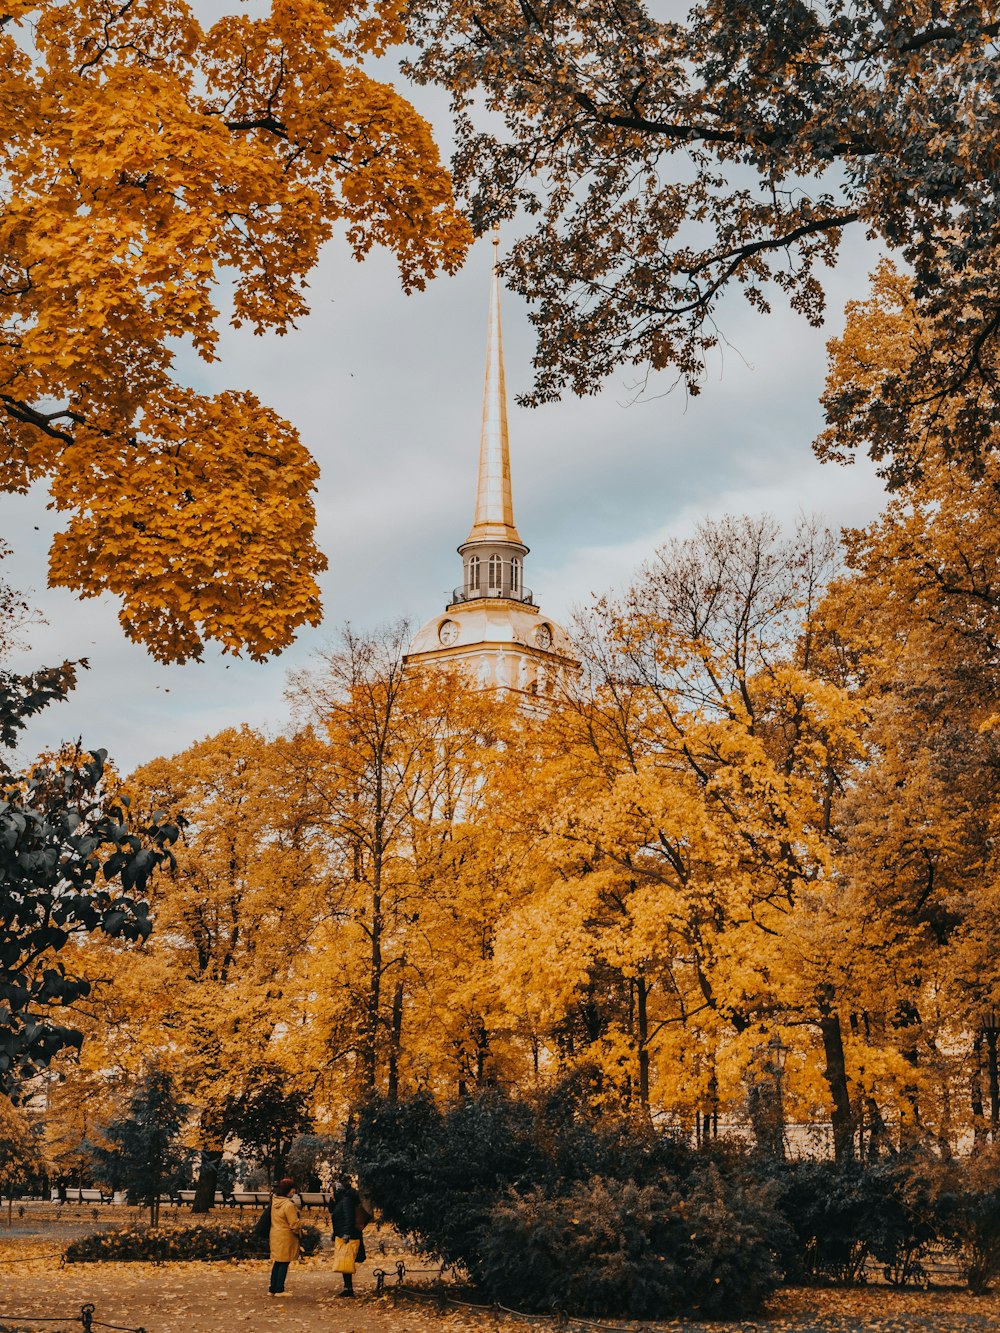 a church steeple surrounded by trees with yellow leaves